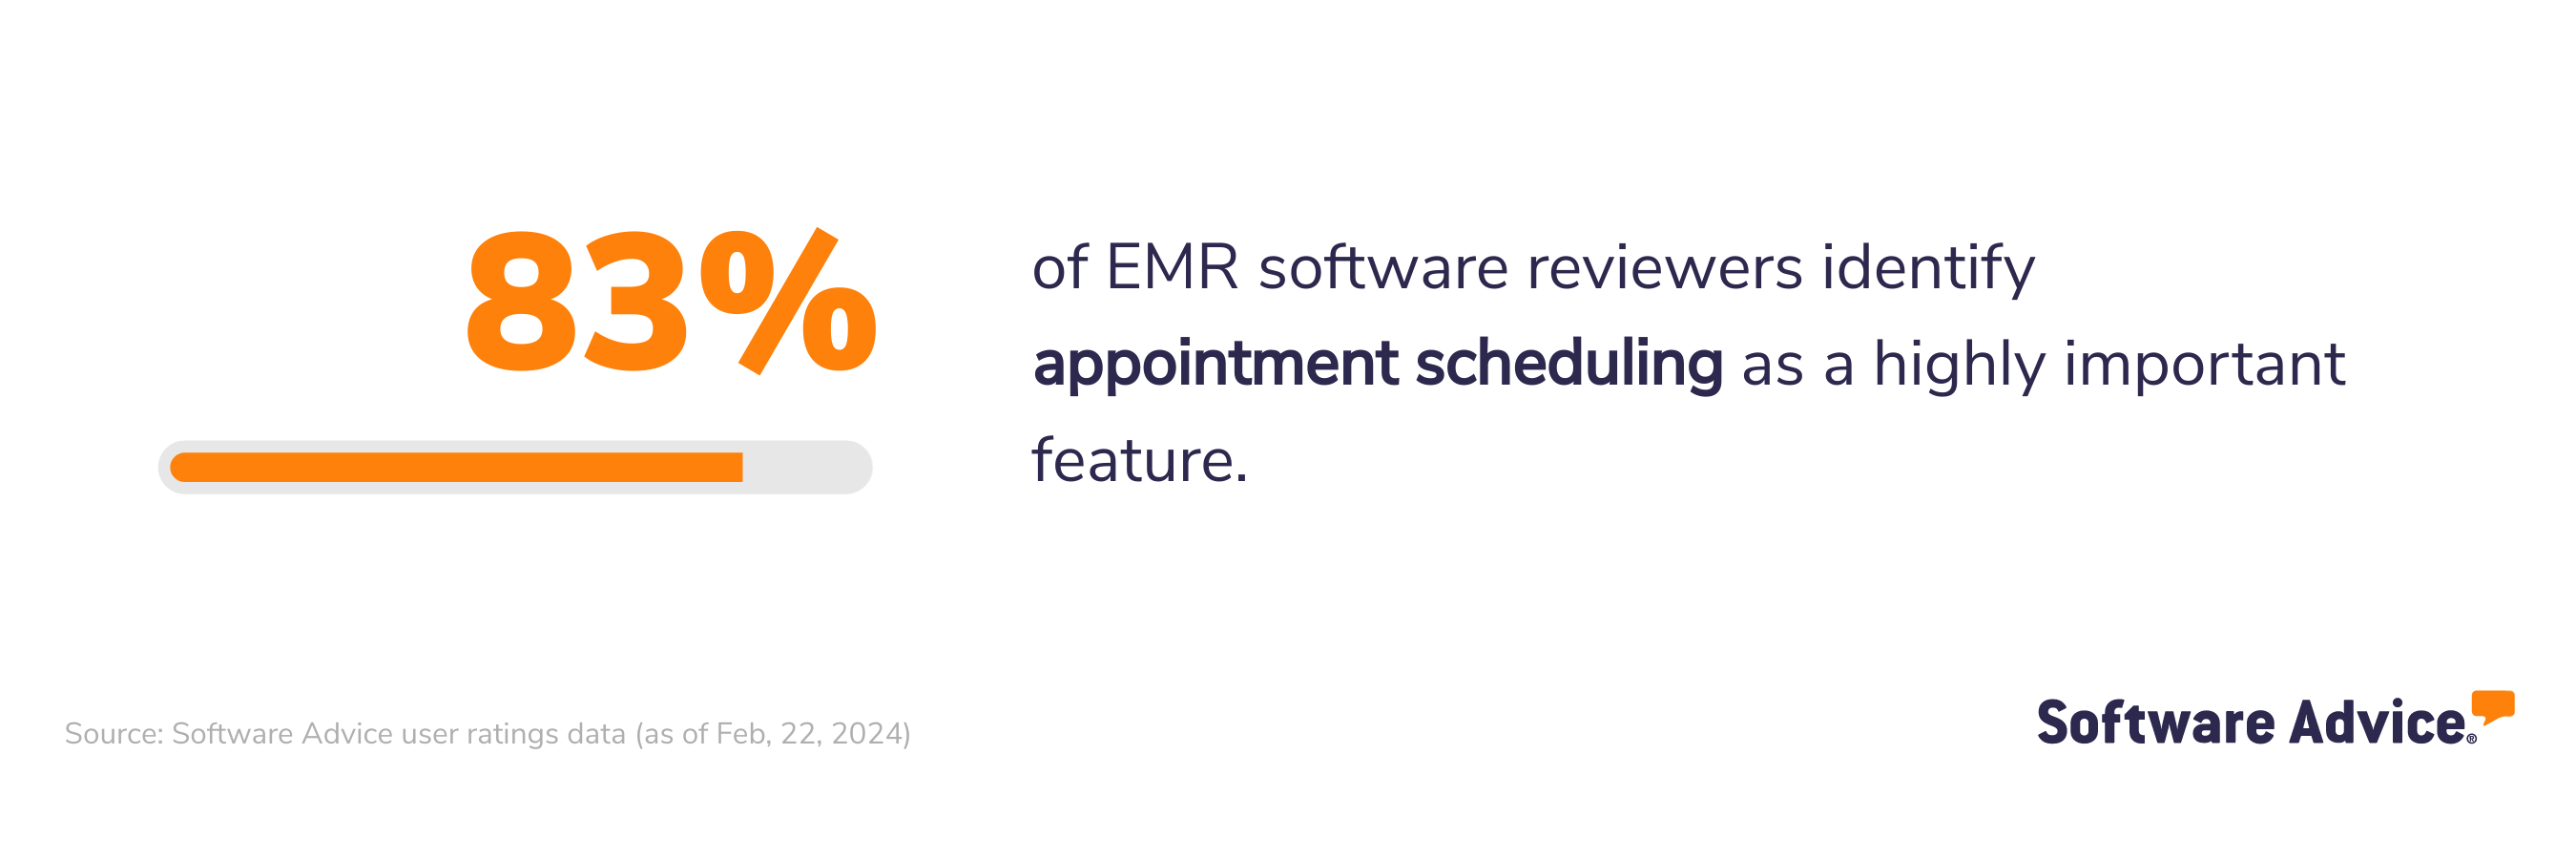 83% of EMR software reviews identify appointment scheduling as a highly important feature.